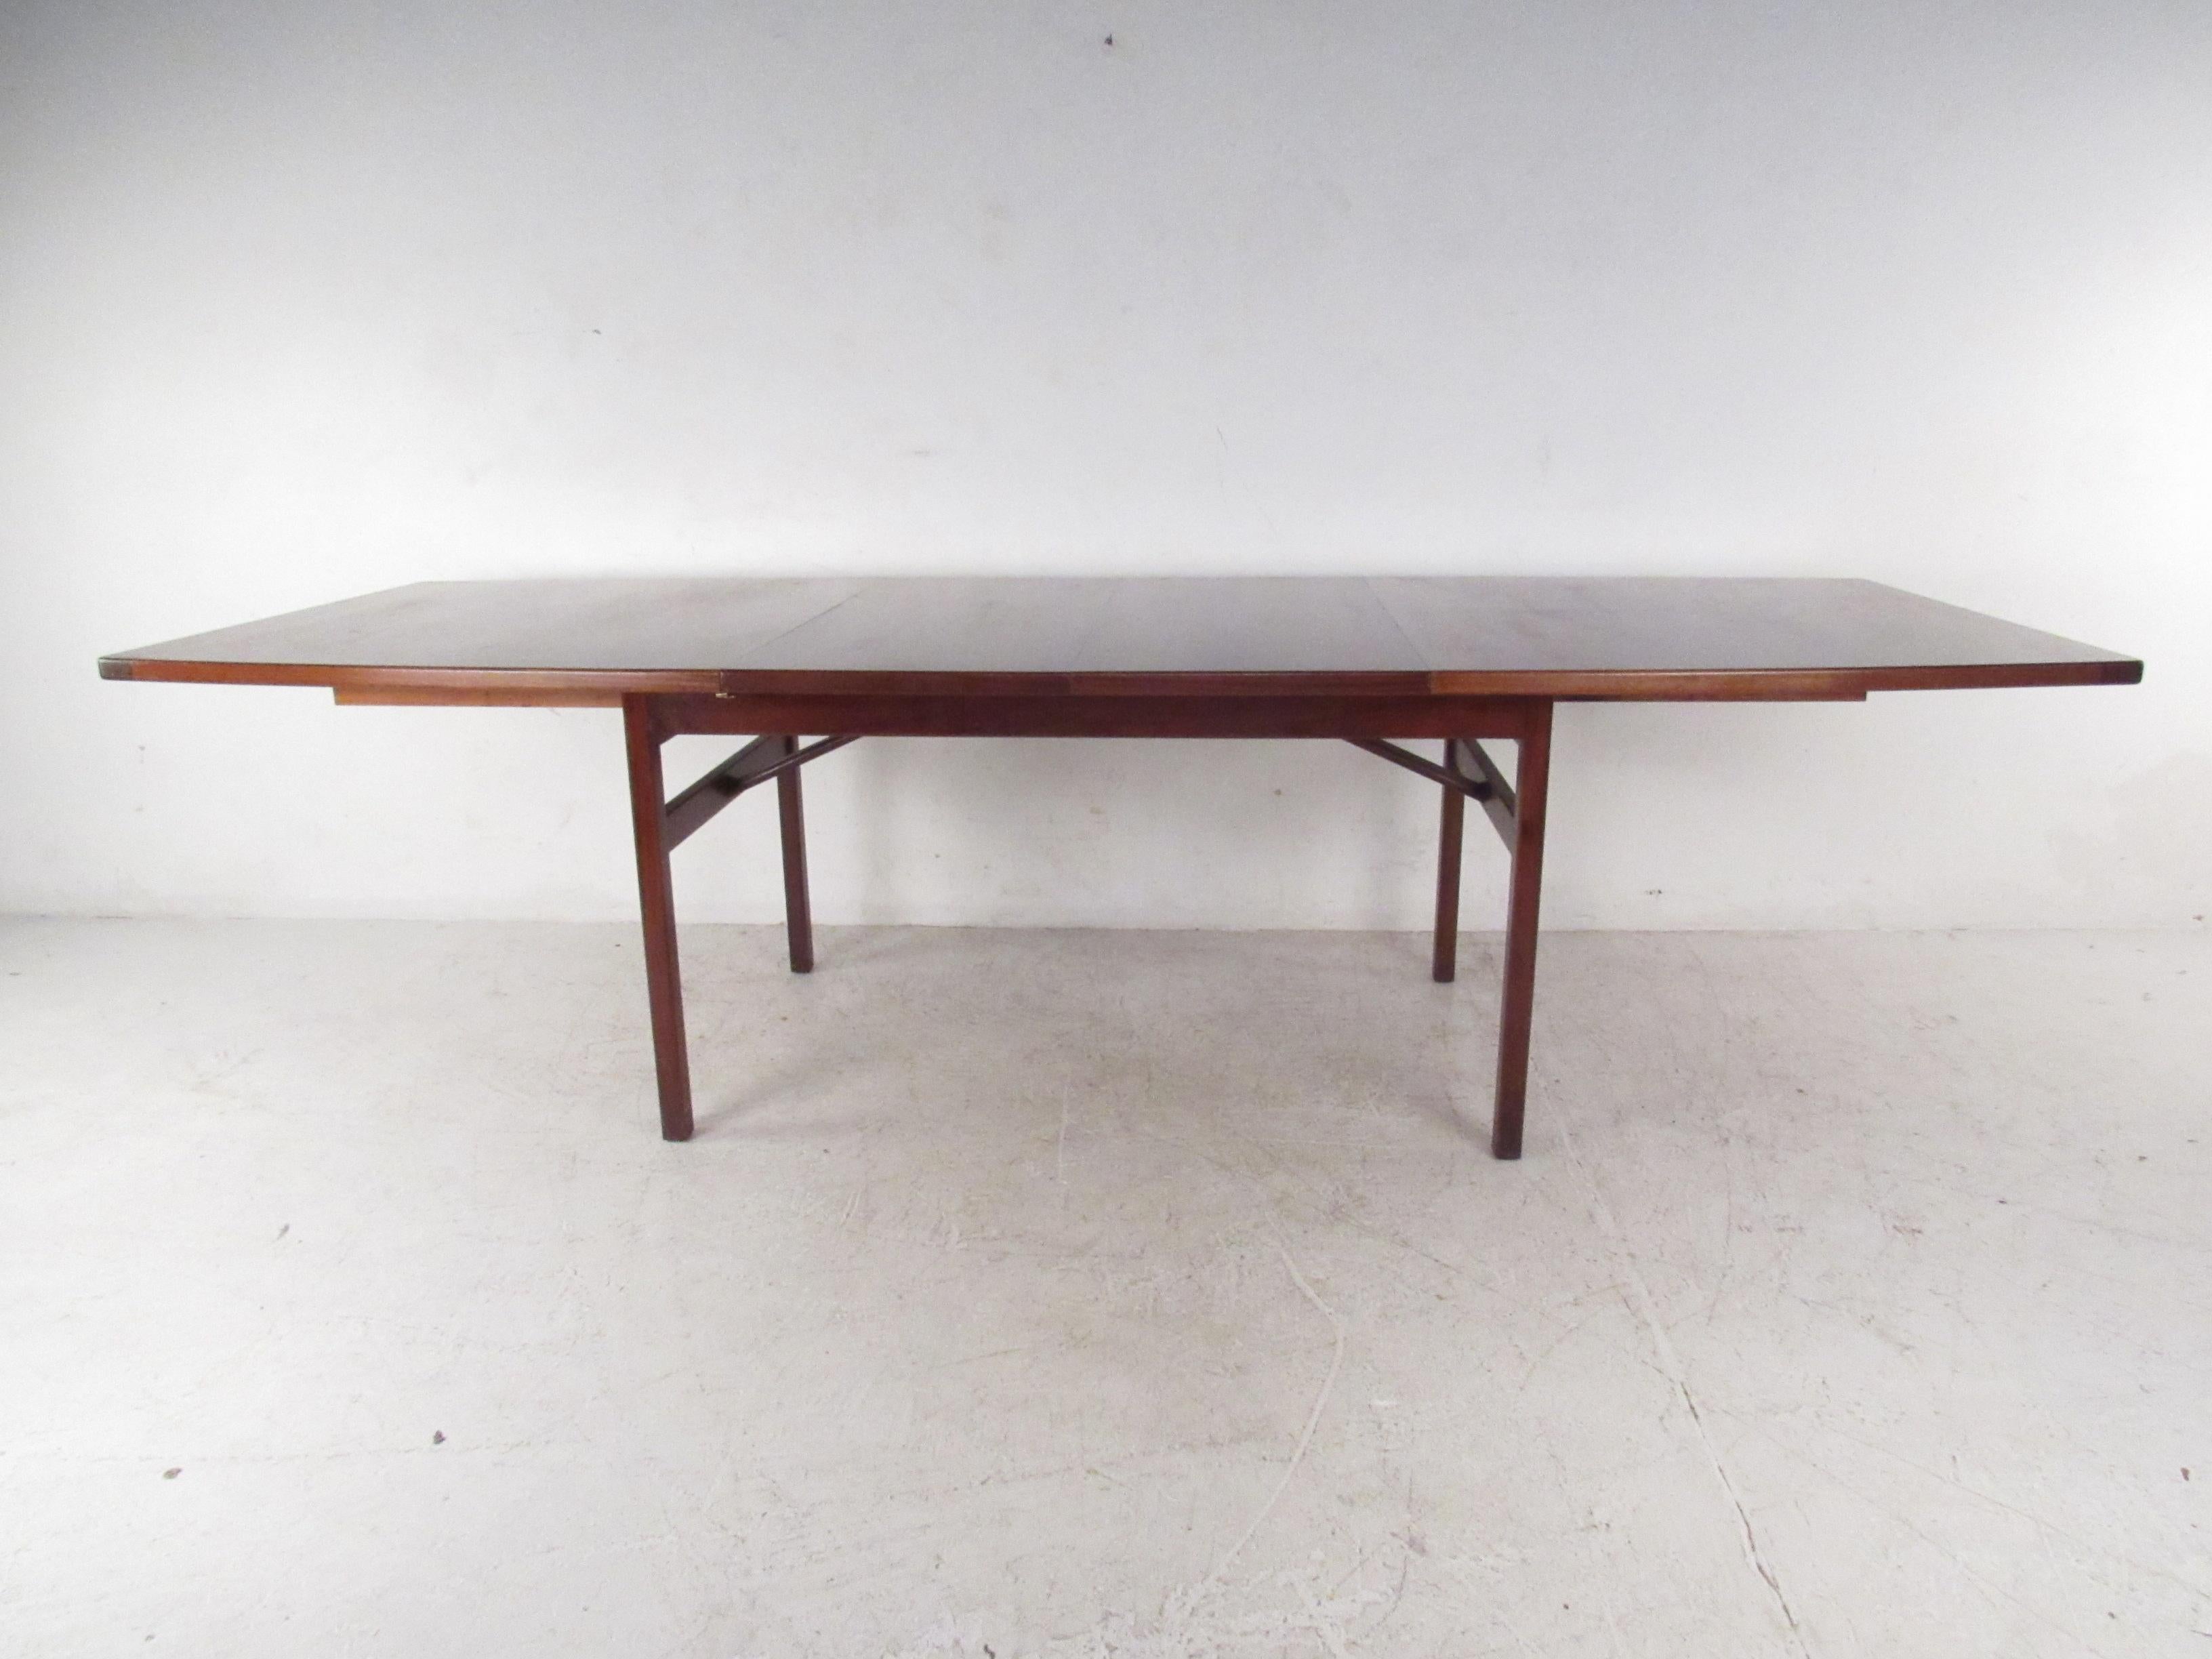 This wonderful vintage modern dining table by Jens Risom Design features a uniquely top that comes with two additional leaves. A well made piece in walnut that easily caters to many guests without sacrificing style. Please confirm item location (NY